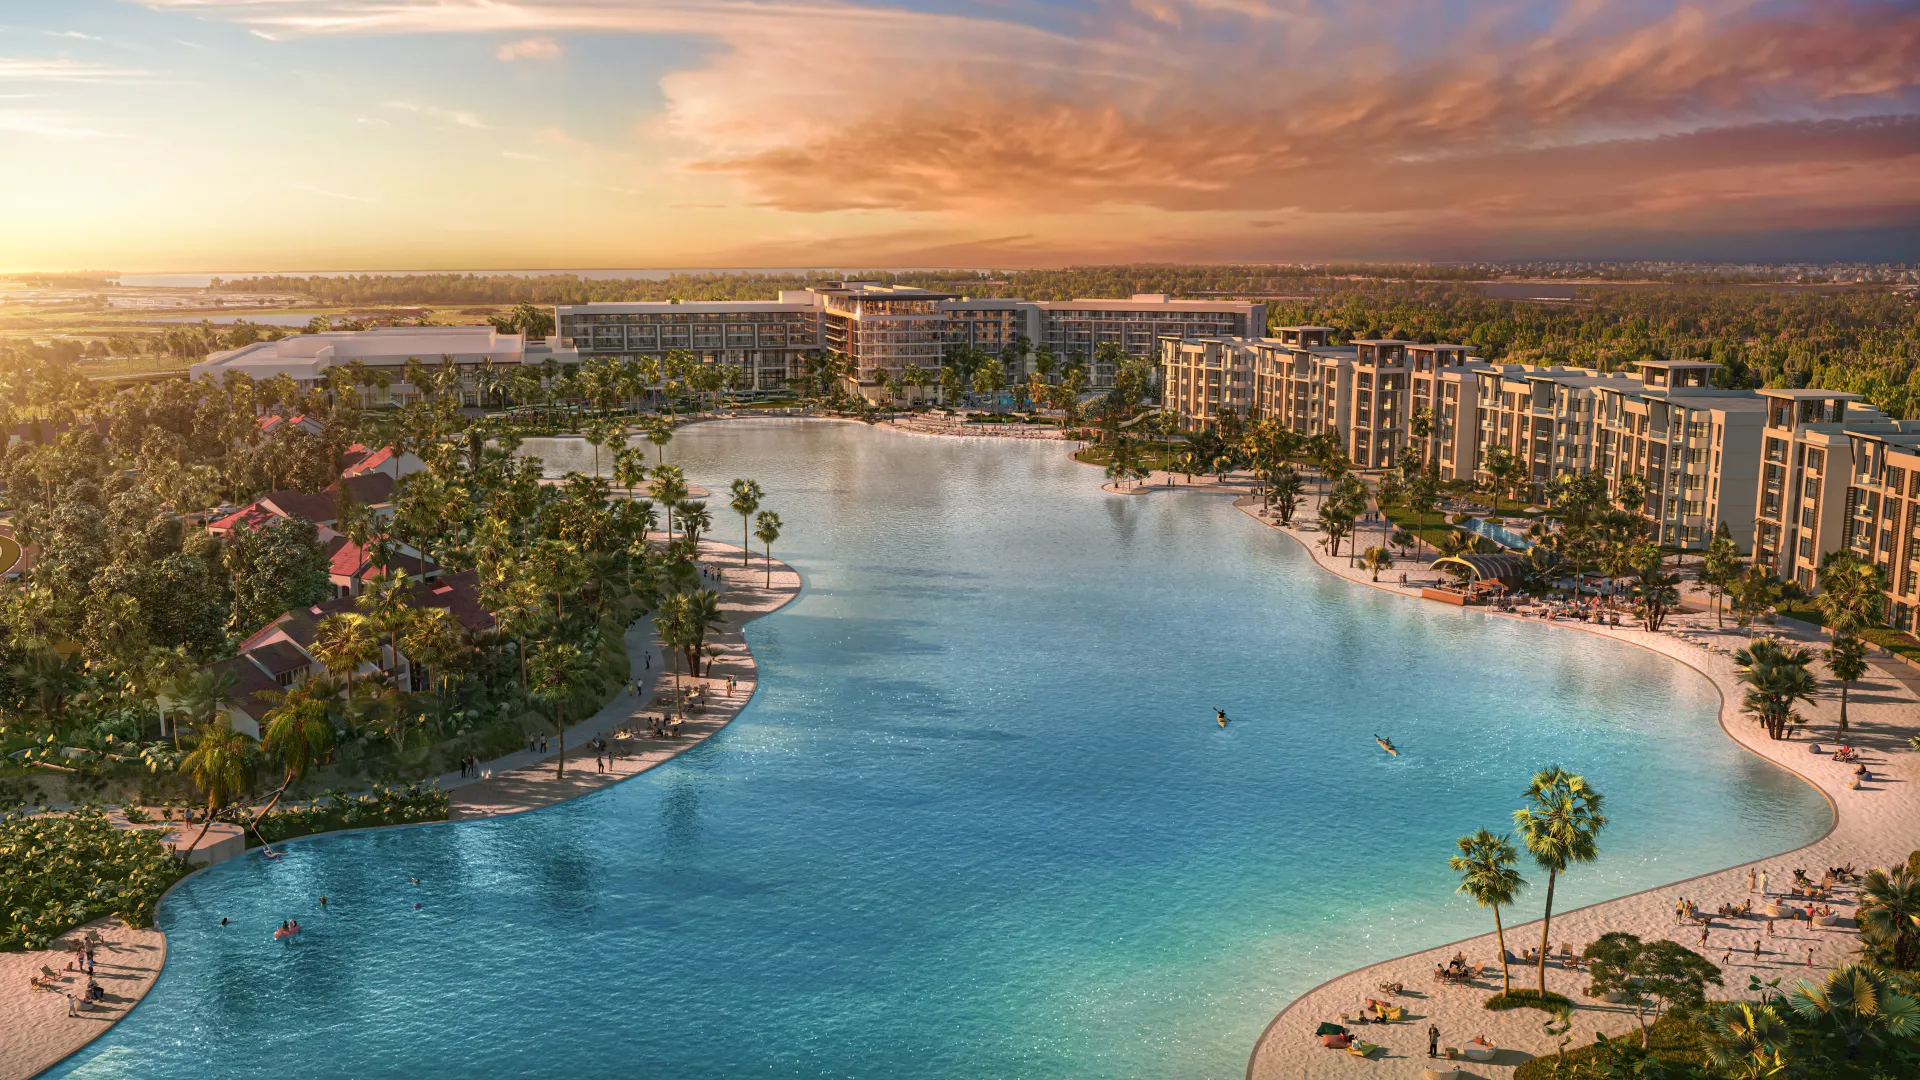 Overview rendering of Evermore Bay and Surrounding Accommodations including Conrad Orlando